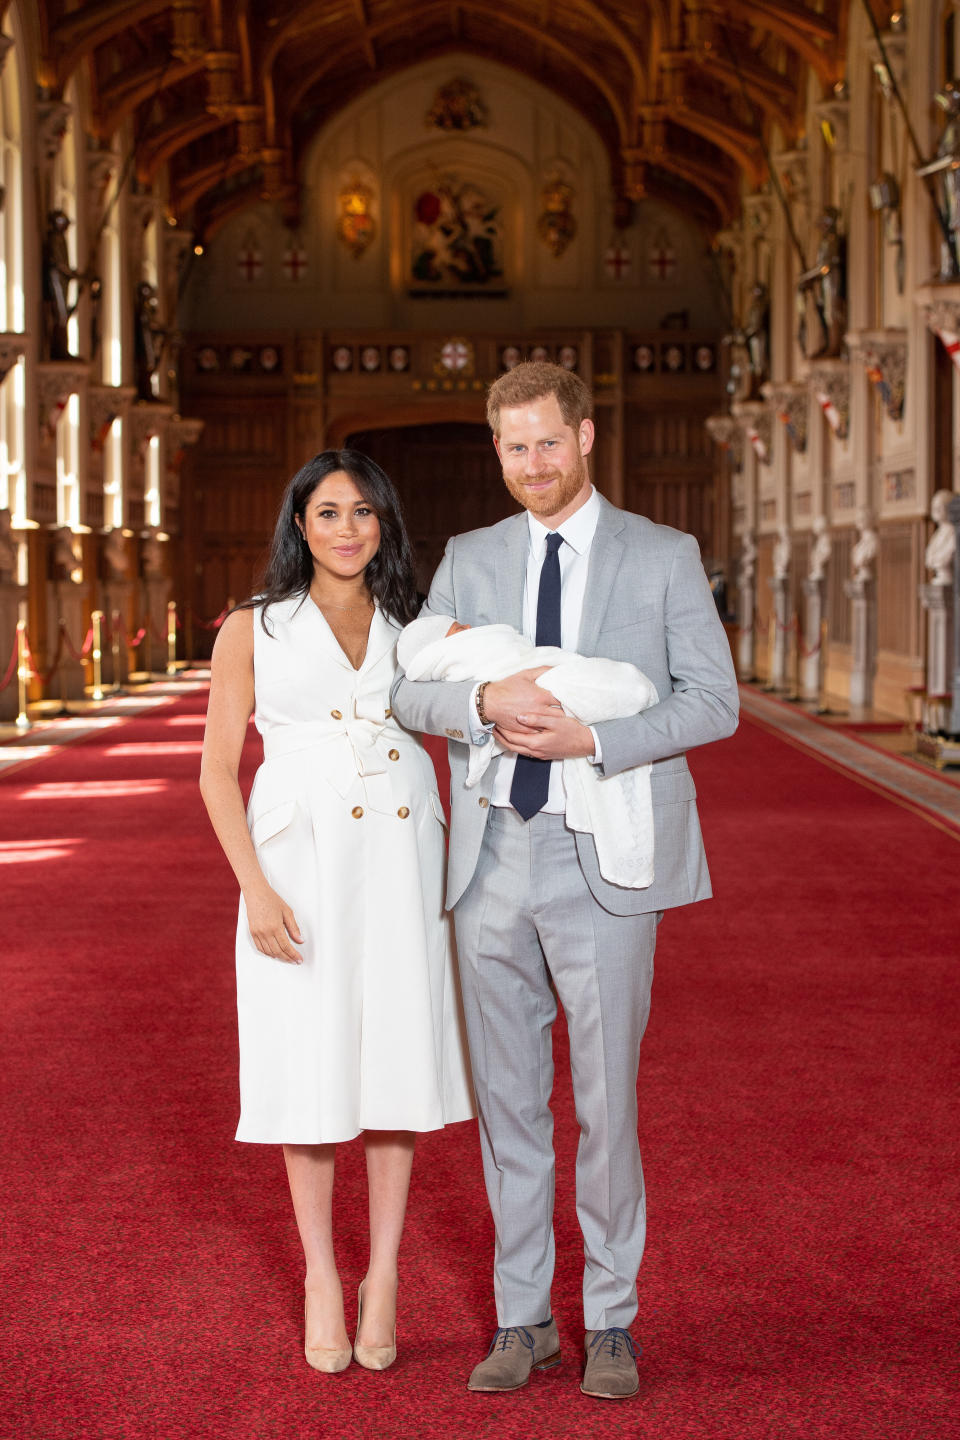 The Duke and Duchess of Sussex with their baby son, who was born Monday morning, during a photocall in St George's Hall at Windsor Castle in Berkshire. (PA Wire/PA Images)